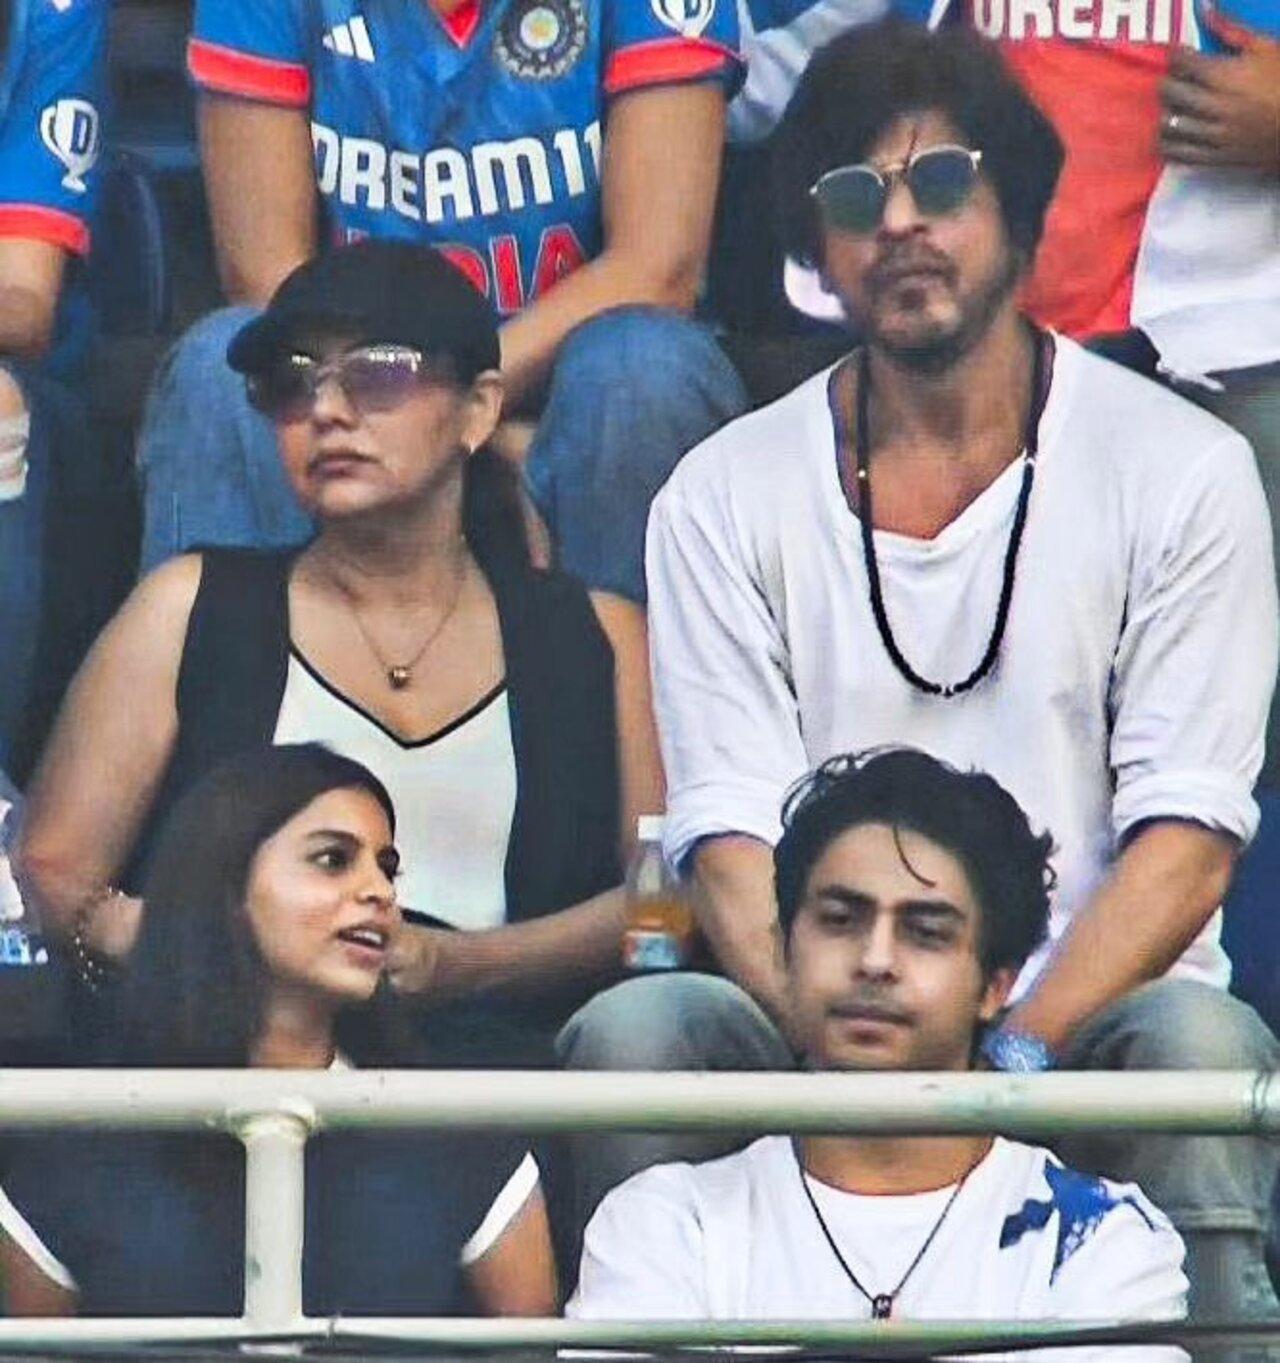 The Khan-daan was in attendance to cheer for Team India from the stands. Shah Rukh Khan, Gauri Khan, Suhana Khan and Aryan Khan were caught in an engrossed moment at the world cup on Sunday